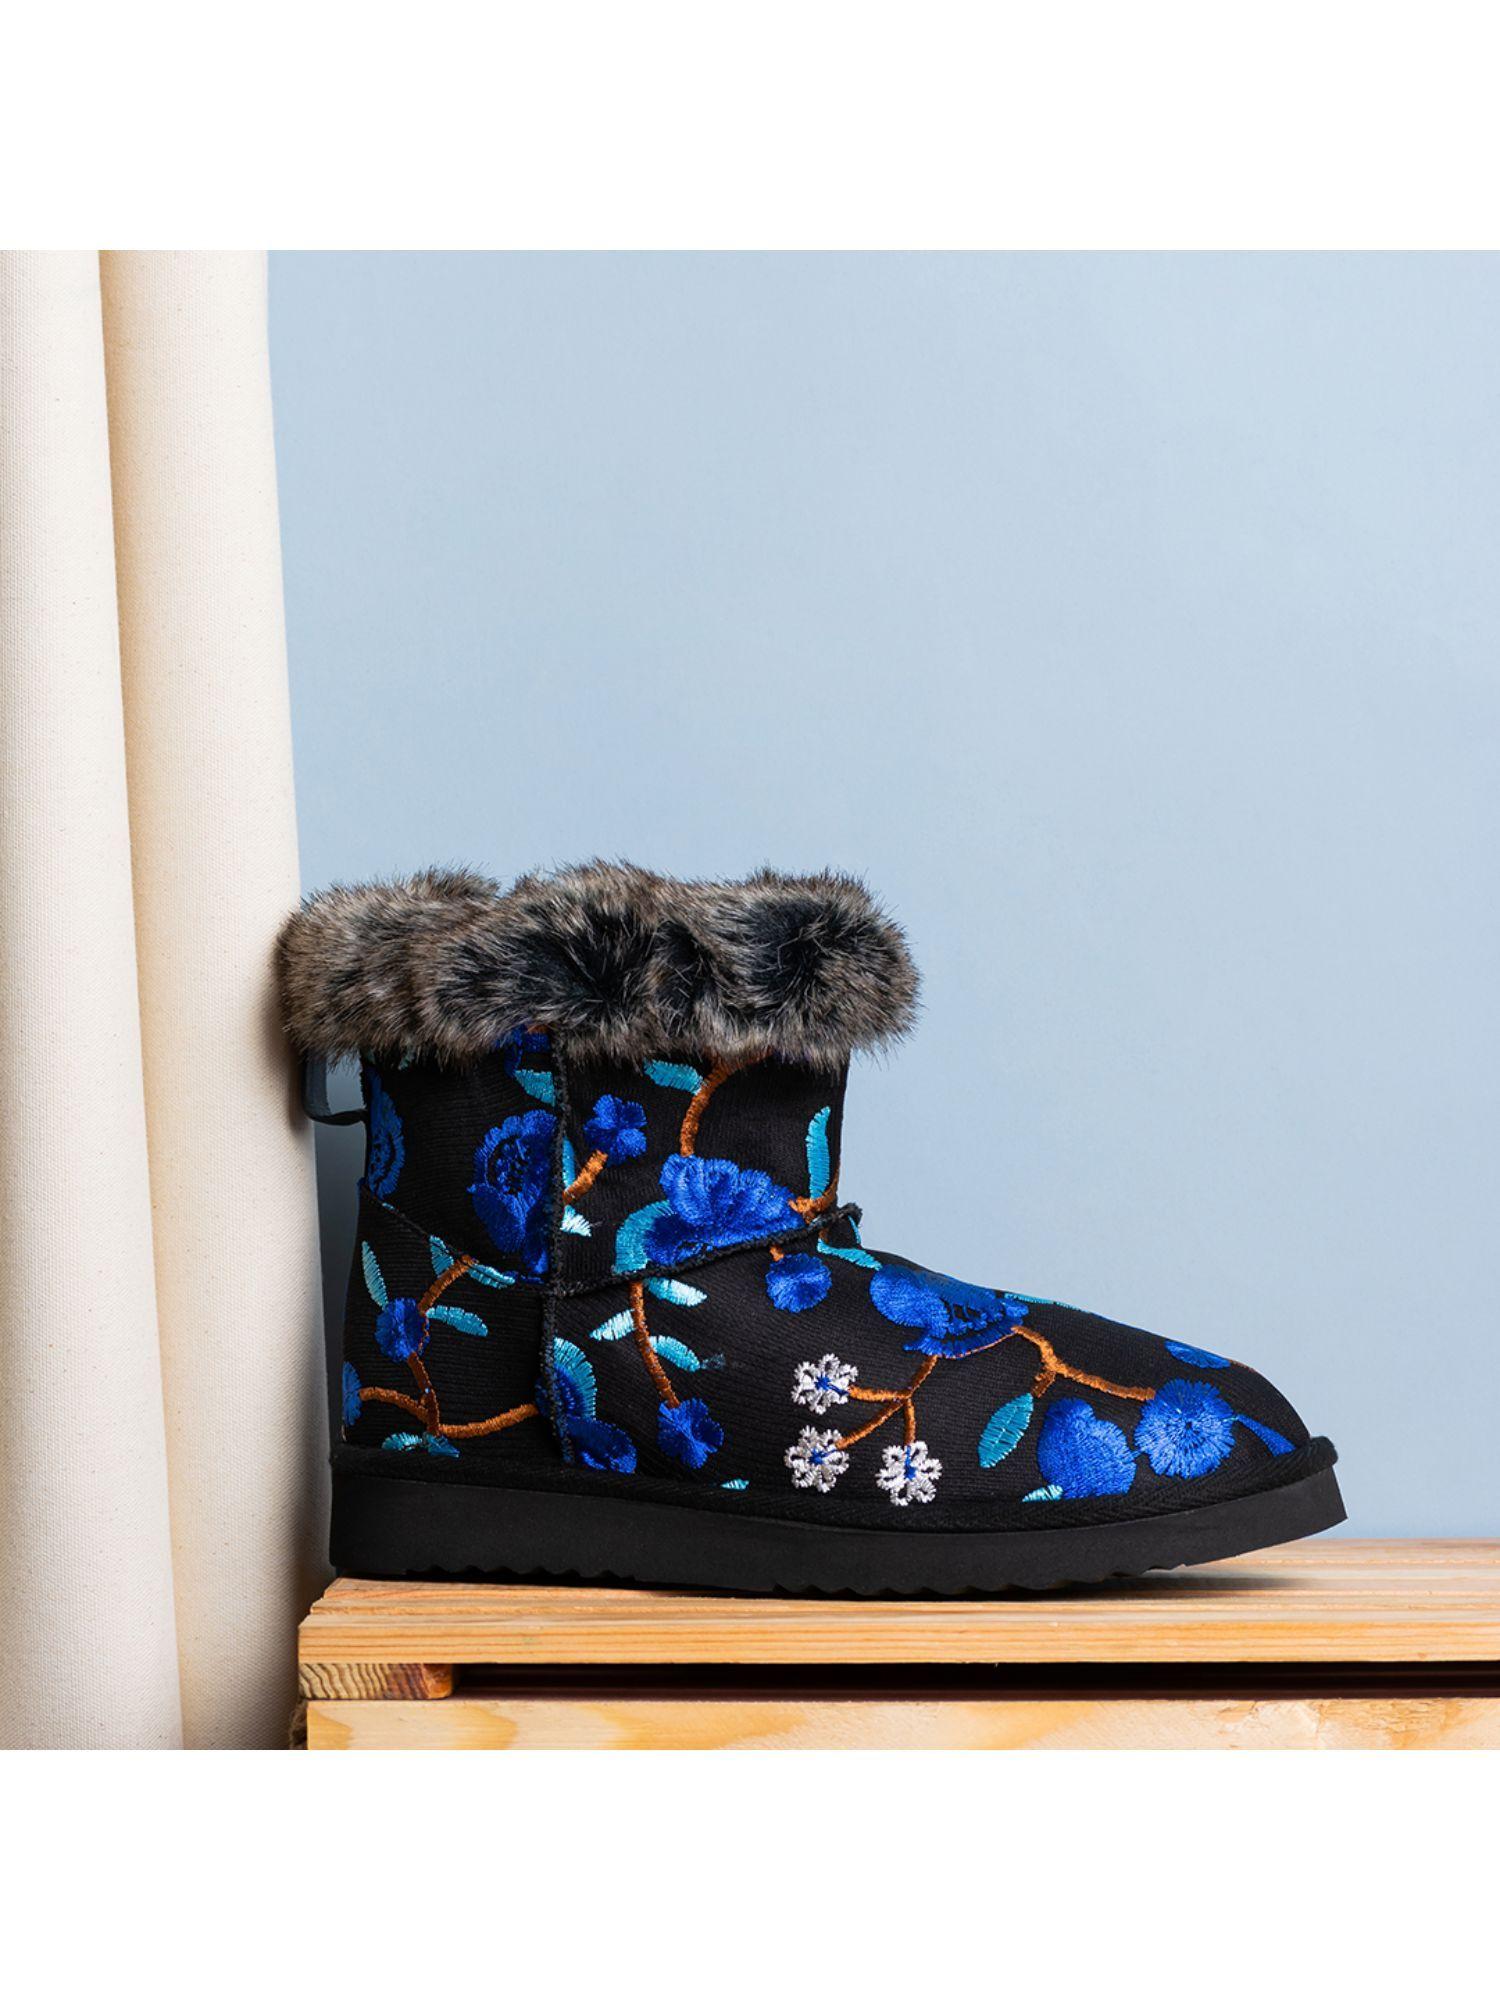 embroidered blue suede leather snug boots